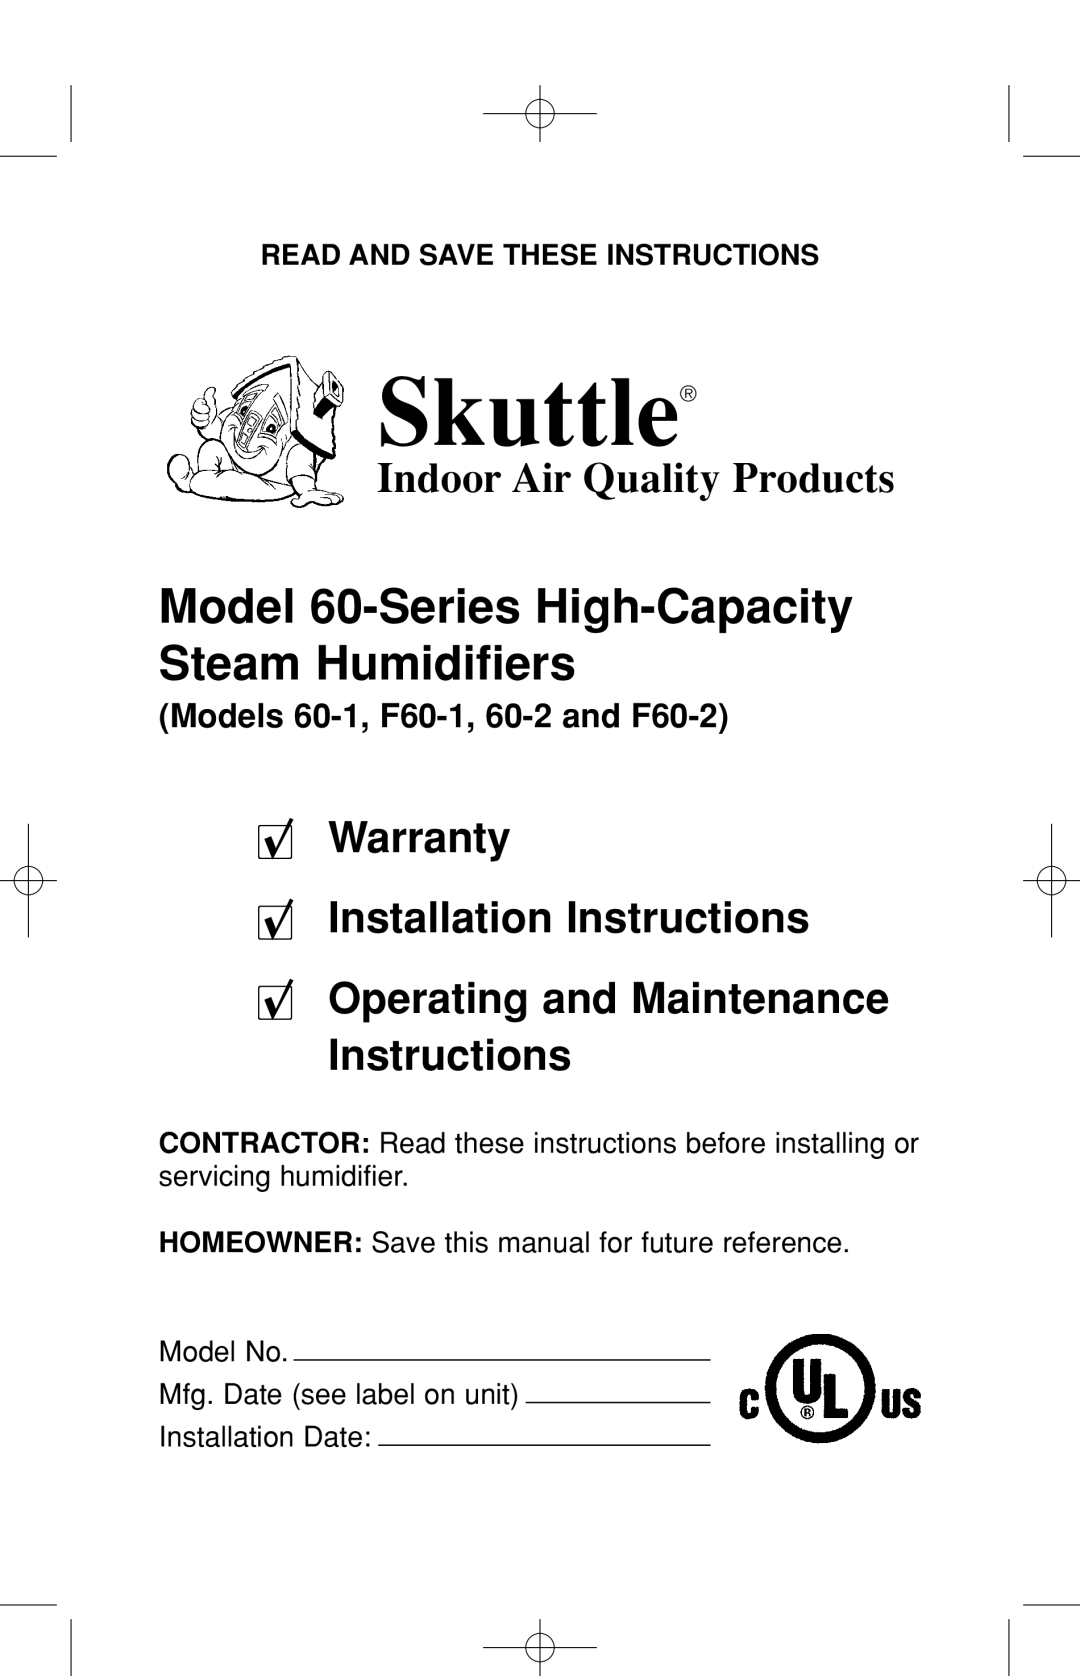 Skuttle Indoor Air Quality Products 60-2, F60-2 warranty Indoor Air Quality Products, Read And Save These Instructions 